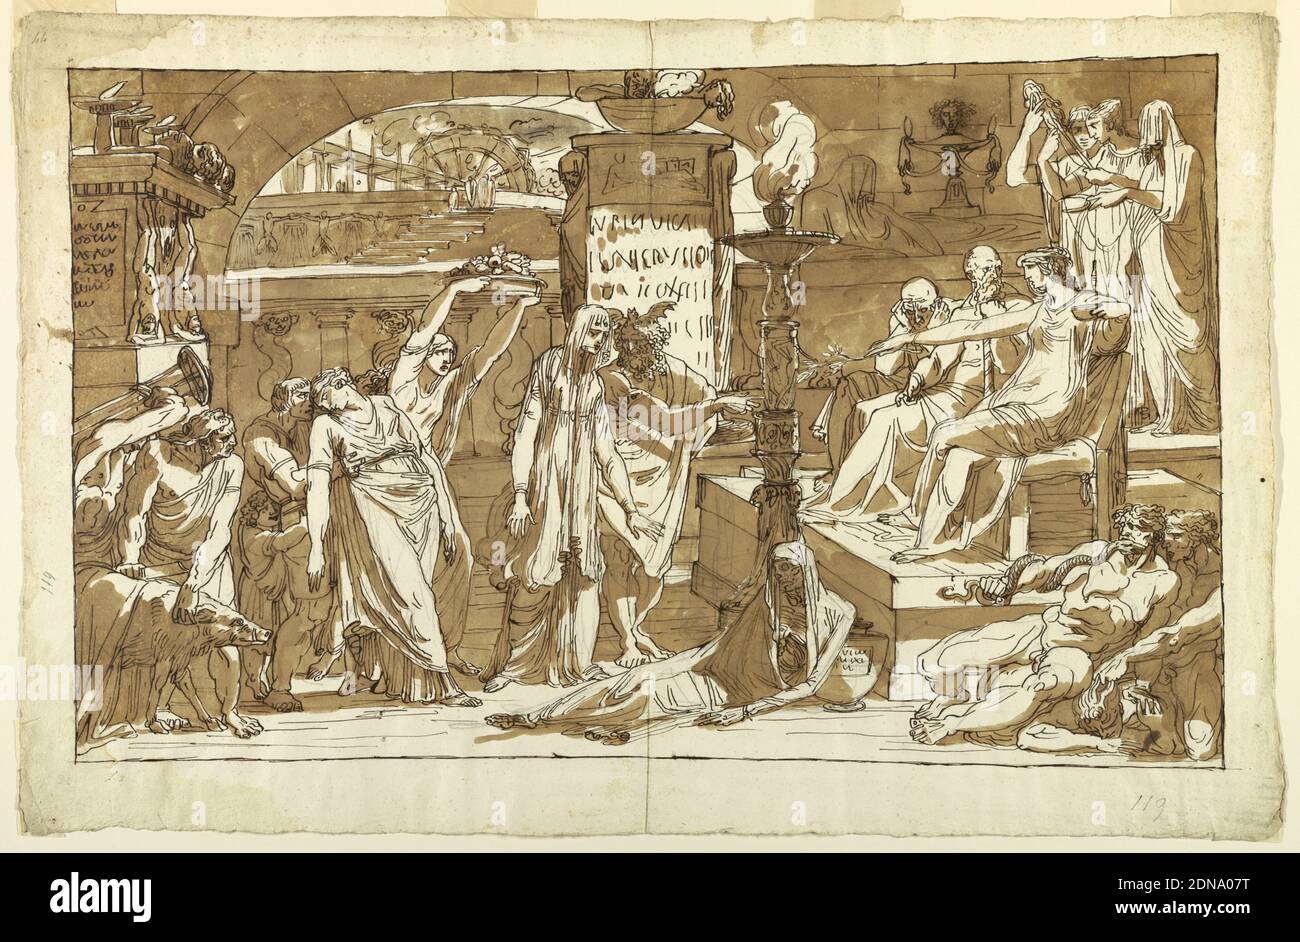 Hades; Persephone in the Underworld (Offering to Proserpine), Felice Giani, Italian, 1758–1823, Pen and black ink, brush and brown wash, graphite on paper, Proserpina, Pluto and Sleep are shown at right seated upon a platform, with the Fates standing behind them. Proserpina extends a branch toward a girls lead to her by Death, a bearded man with a bat upon his head and his name “VS” upon his right sleeve. A man supporting a dead woman comes from left; a boy clings to him. Others come to perform sacrifices. The setting is the hall of the Underworld, lighted by lamps. Stock Photo